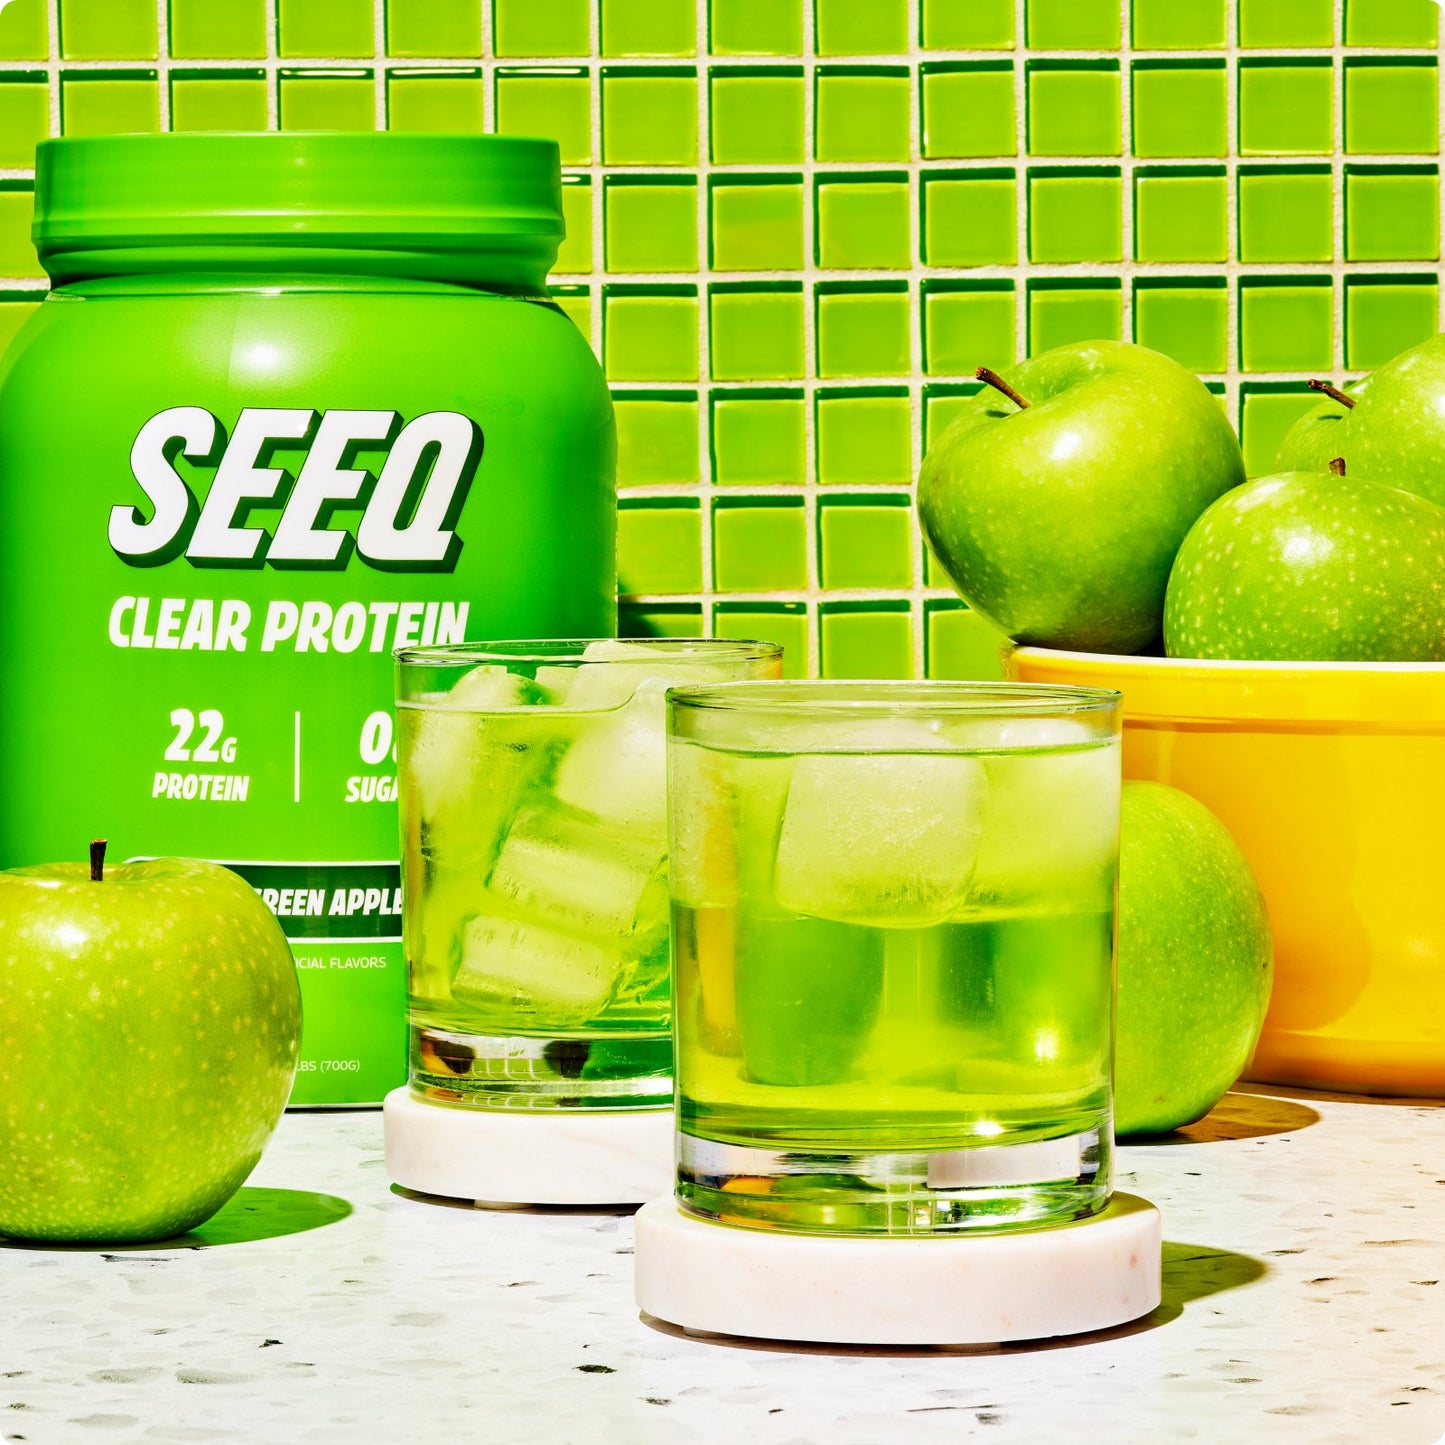 SOUR GREEN APPLE - SEEQ